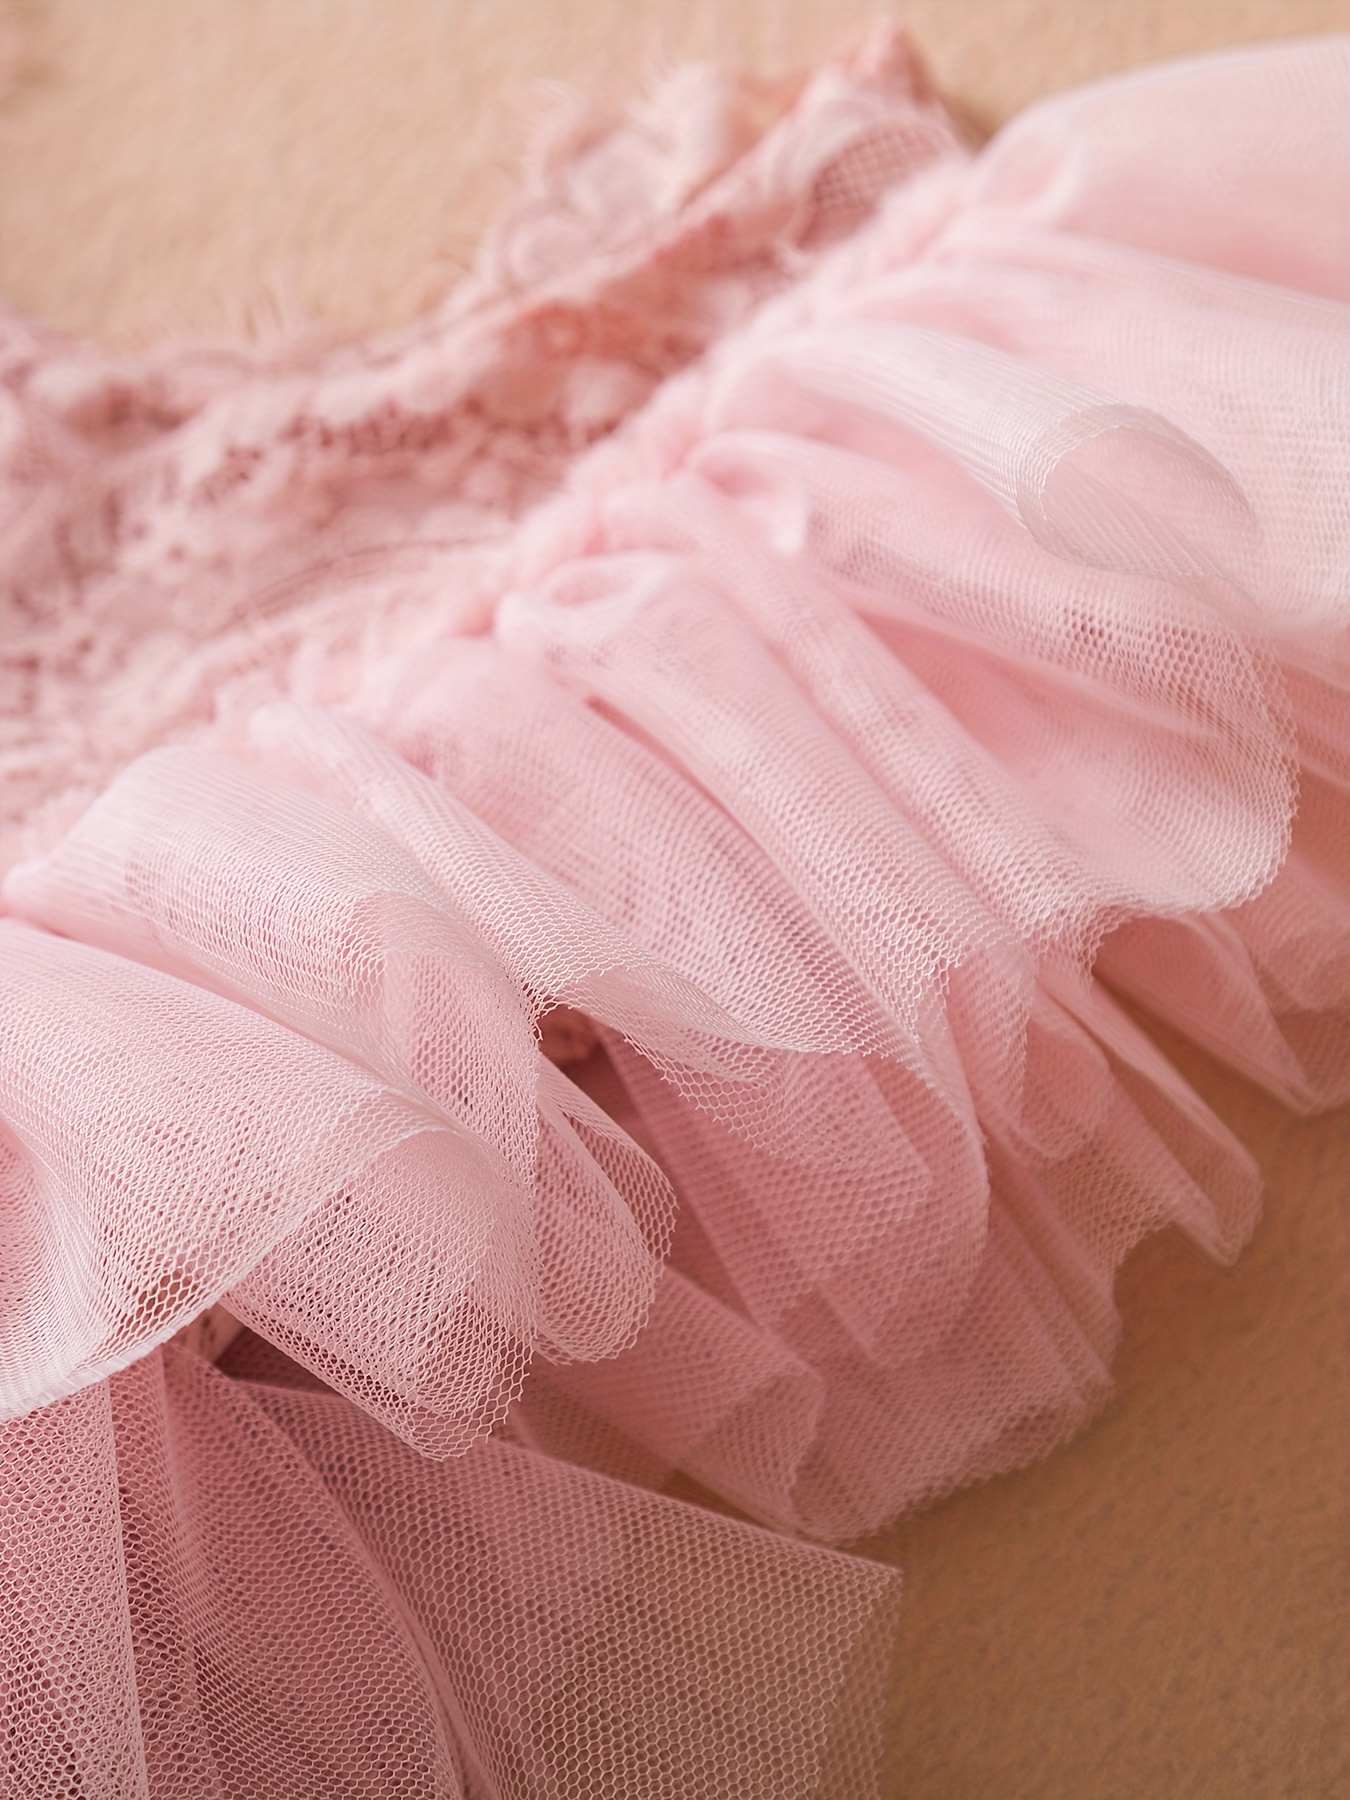 Baby Girls Pink Satin Frilly Lace Knickers Christening Wedding